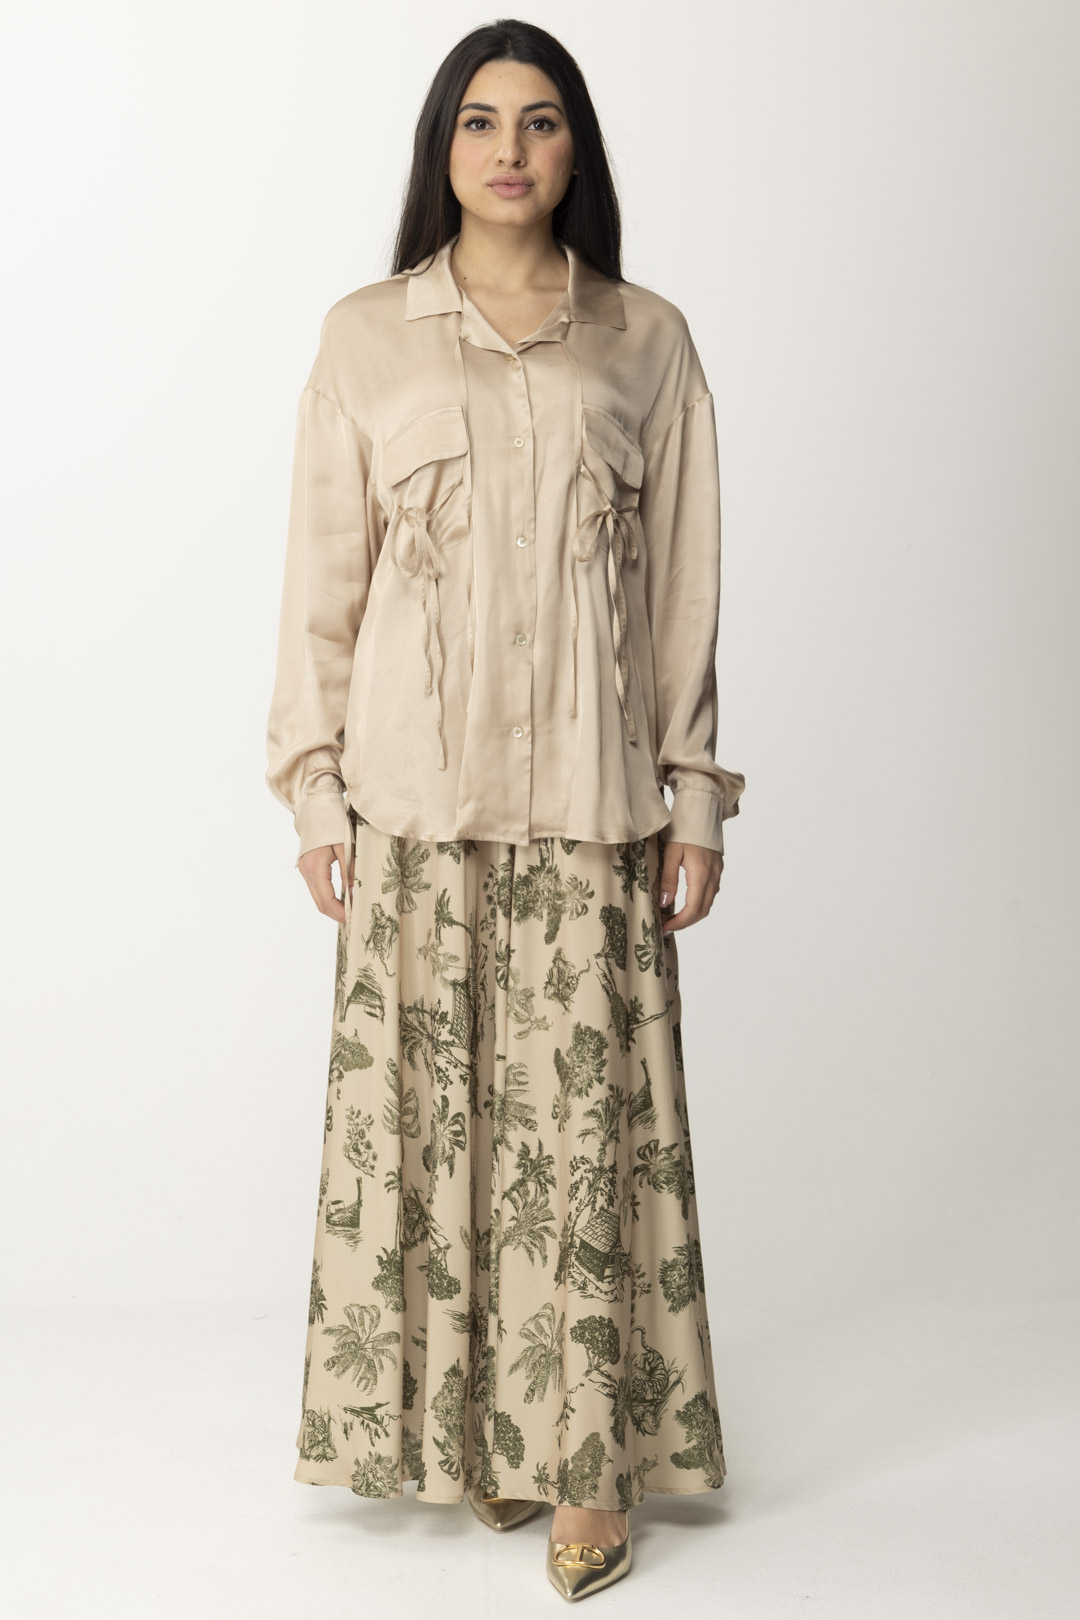 Preview: Aniye By Satin Shirt with Laces - Marys Calce